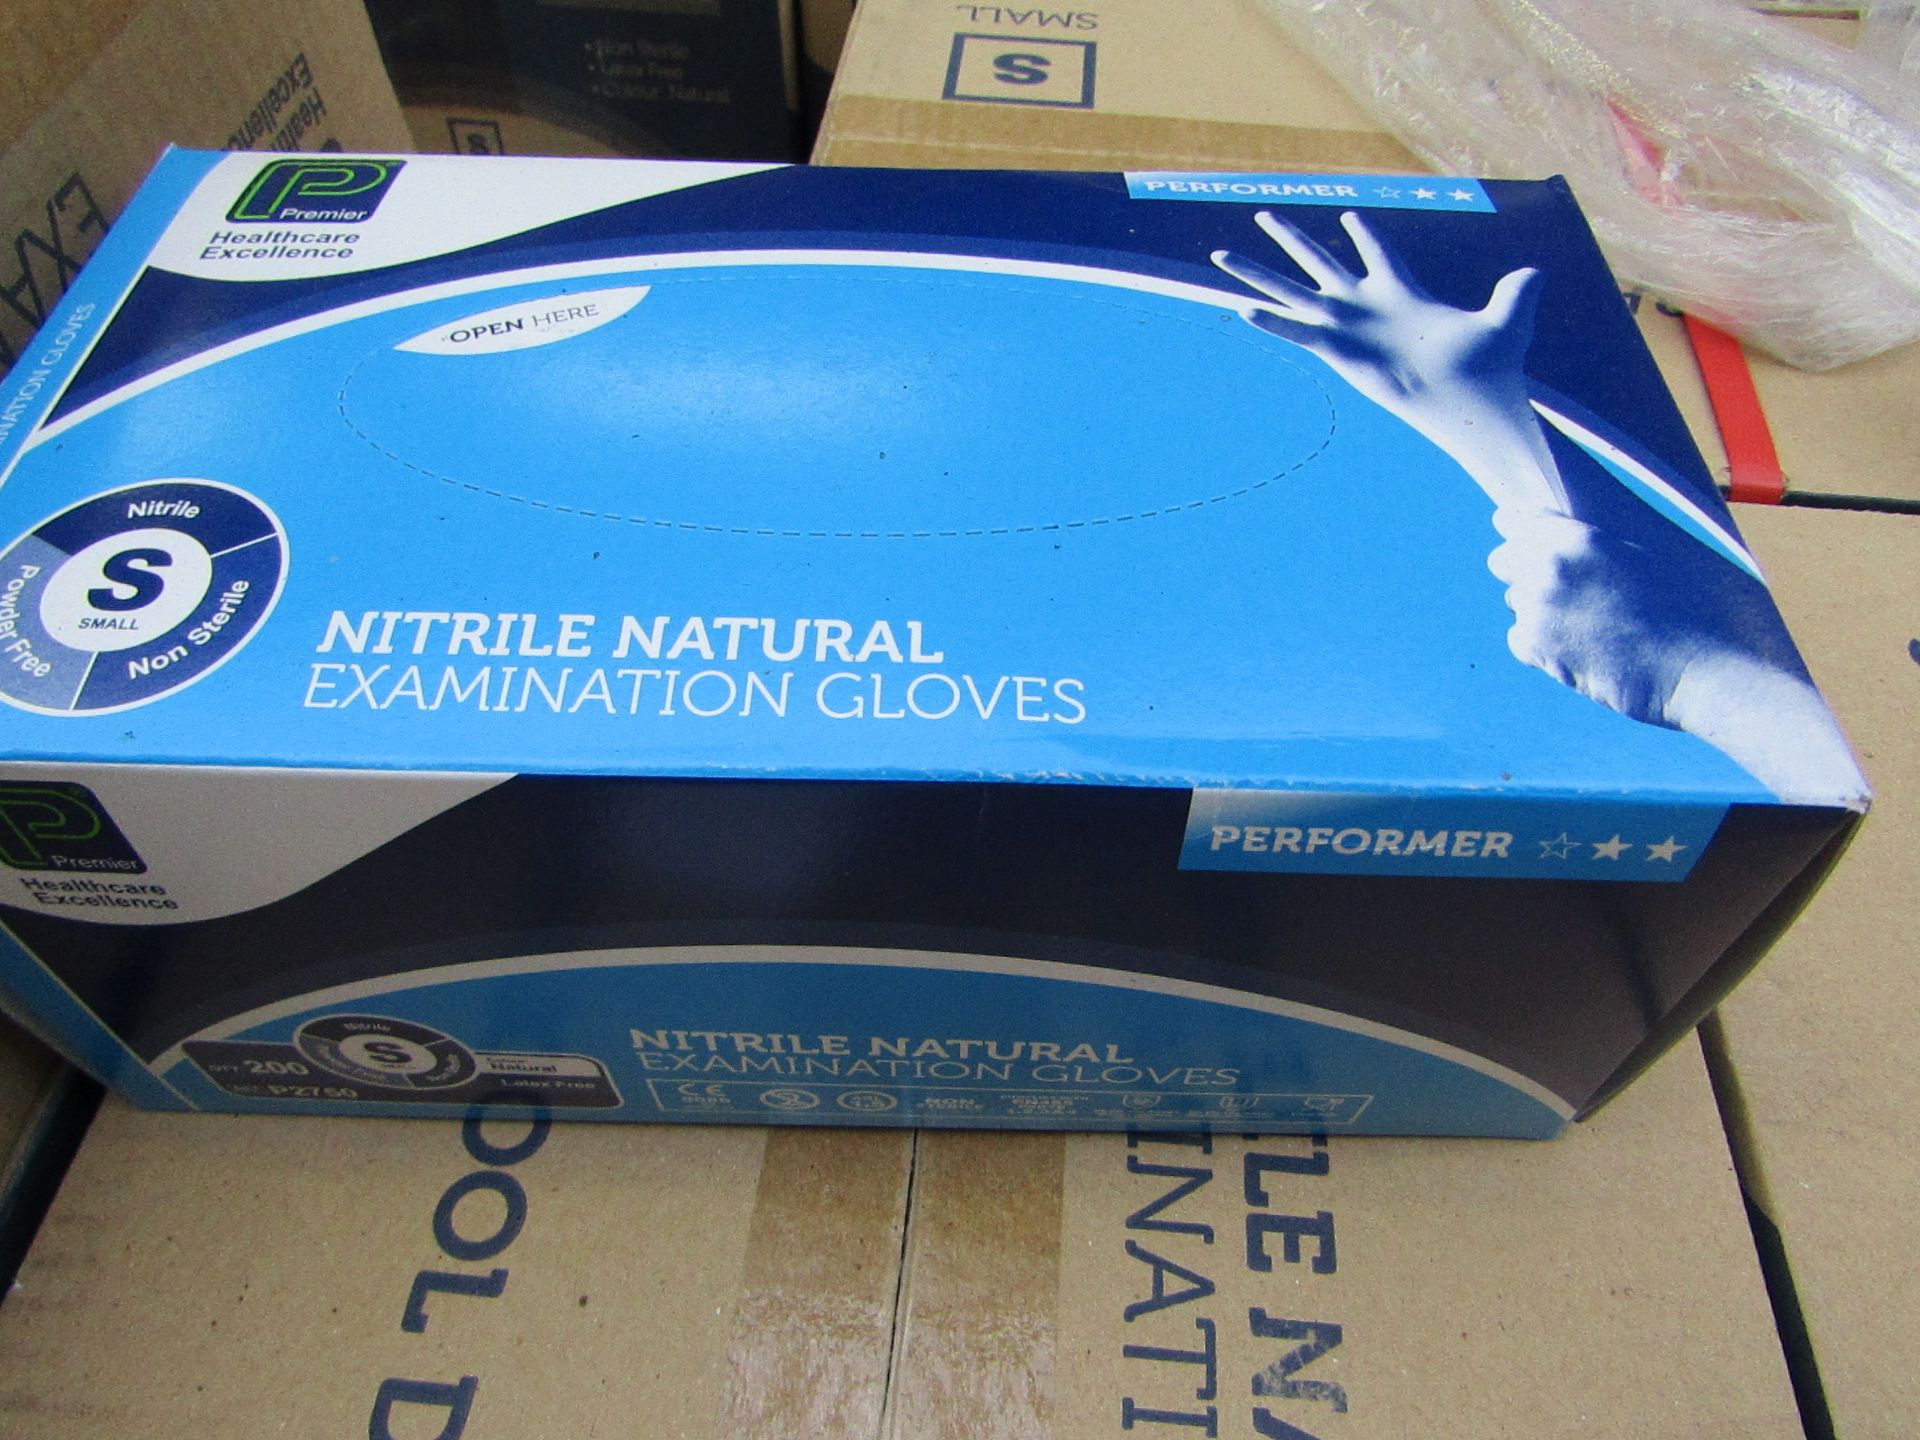 Box of 2000 Nitrile Examination Gloves, new size small